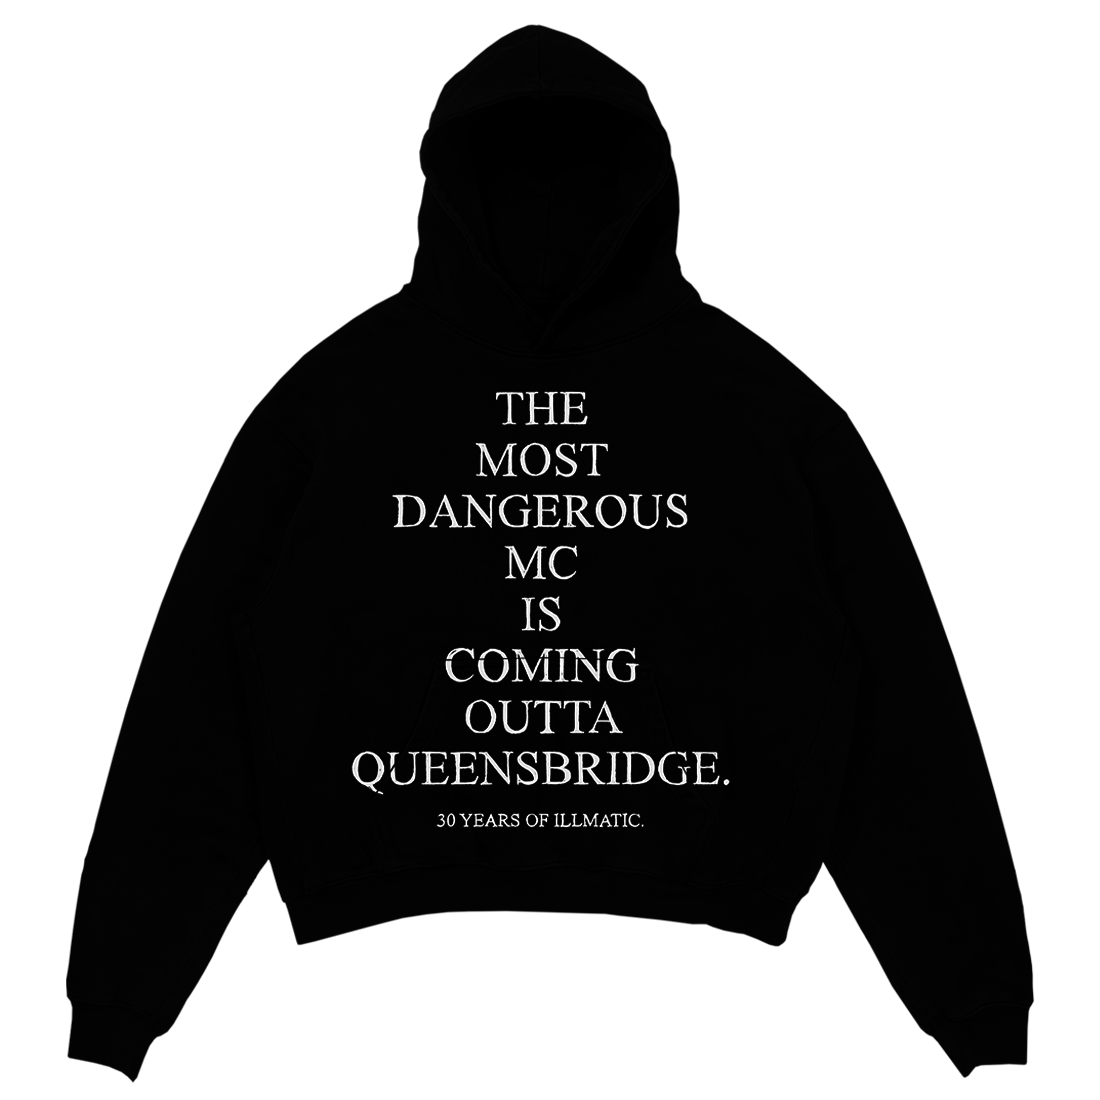 Hoodie with text tribute to the 30th anniversary of &#x27;Illmatic,&#x27; noting a dangerous MC from Queensbridge